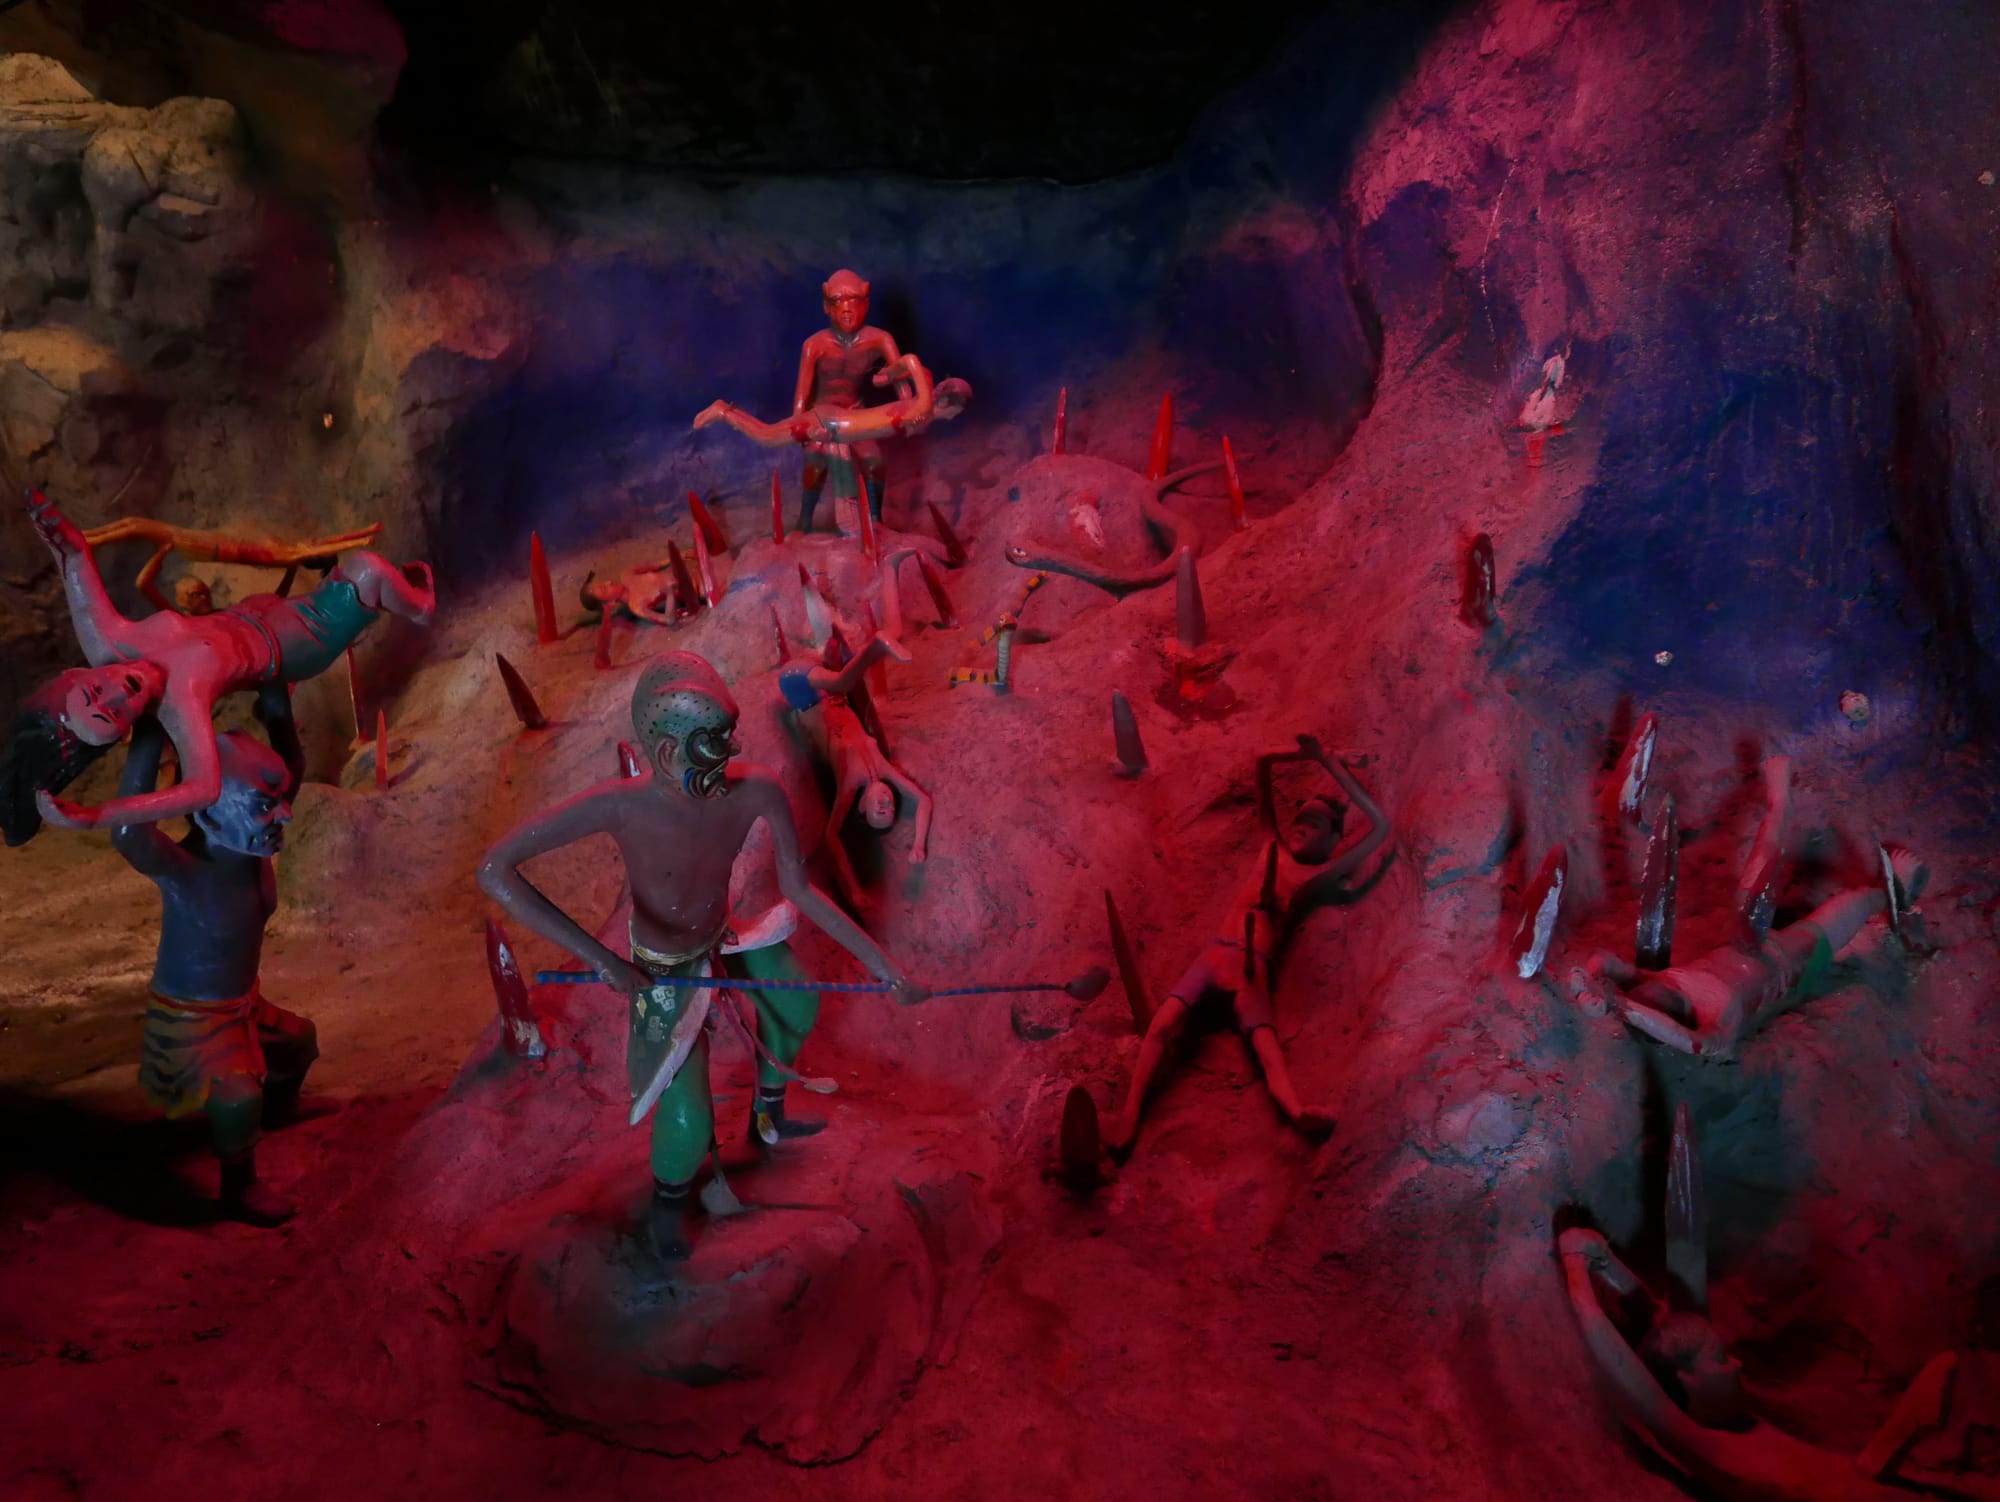 Photo by Author — hill of knives — the Fifth Court of Hell (King Yanluo) — 10 Courts of Hell, Haw Par Villa, Singapore